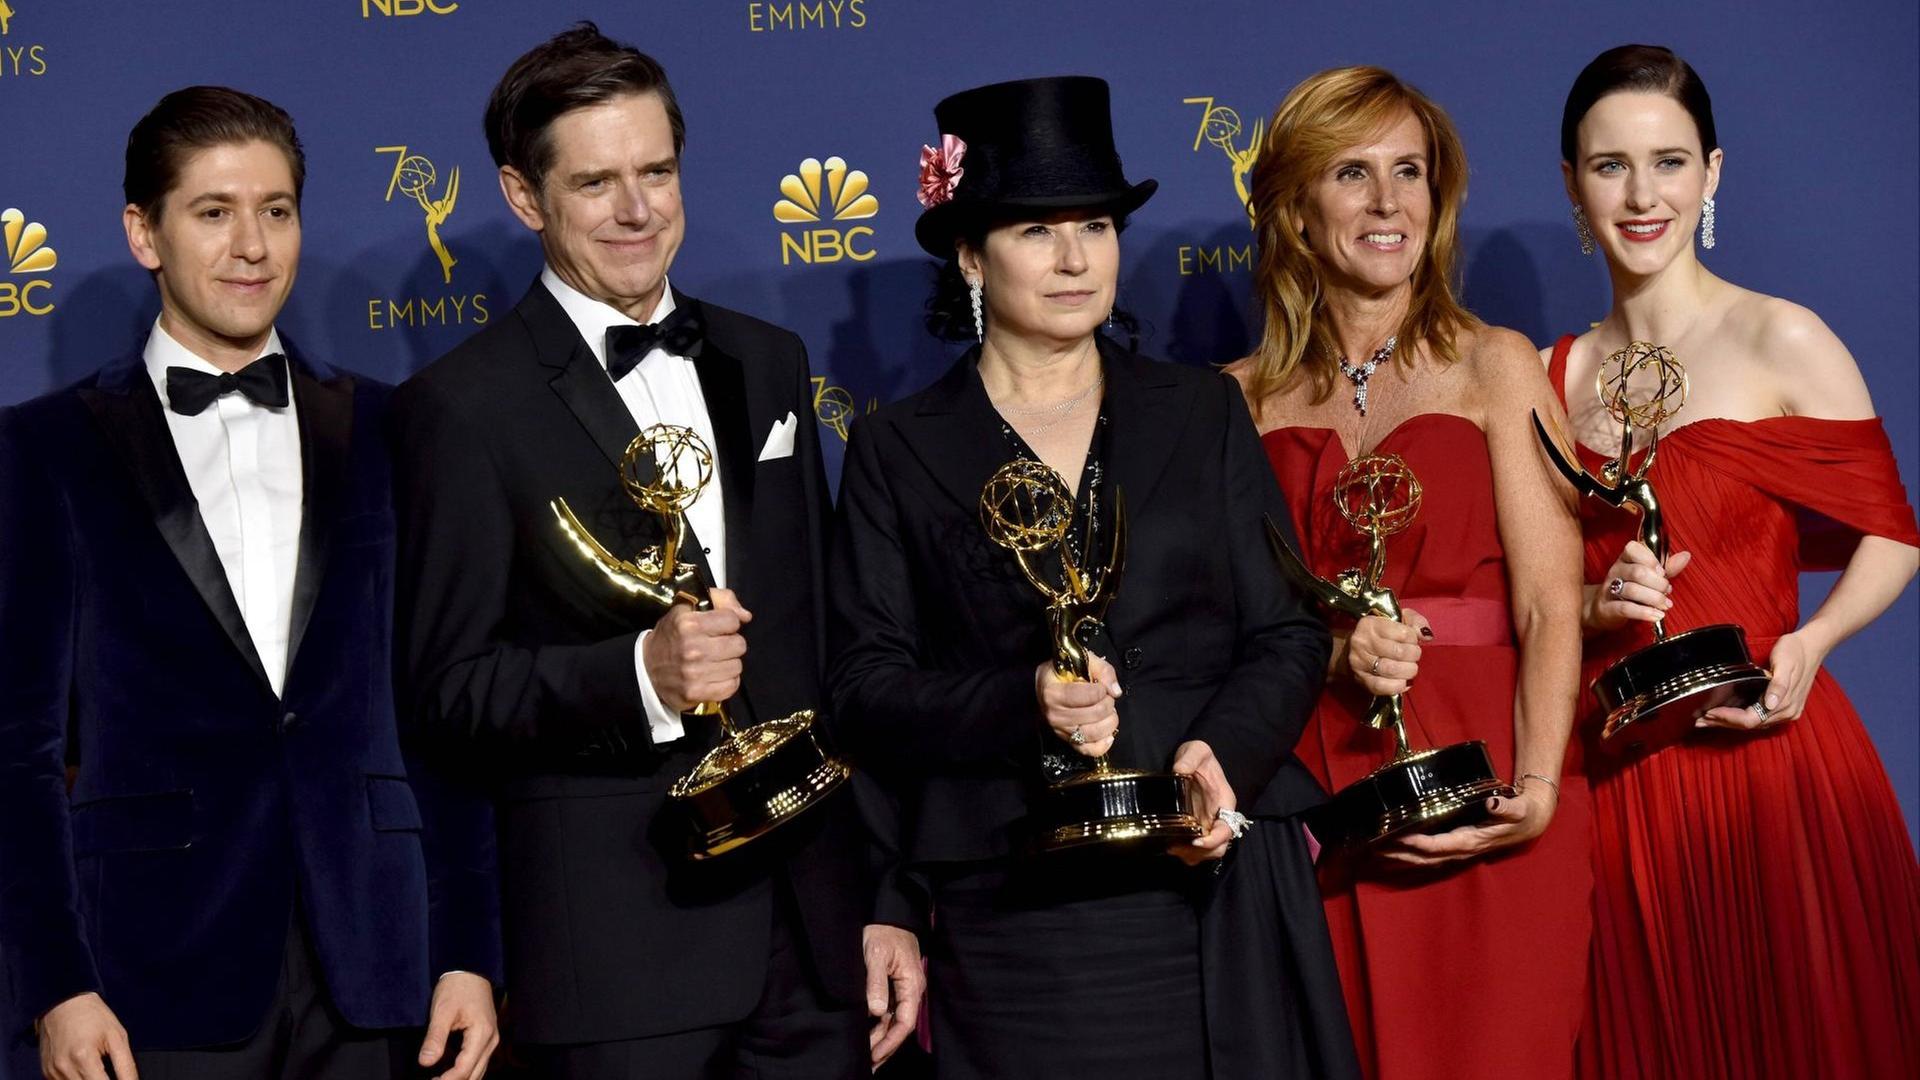 Entertainment Bilder des Tages (L-R) Michael Zegen, Daniel Palladino, Amy Sherman-Palladino, Sheila R. Lawrence and Rachel Brosnahan, winners of the award for Outstanding Comedy Series for The Marvelous Mrs. Maisel, appear backstage during the 70th annual Primetime Emmy Awards at the Microsoft Theater in downtown Los Angeles on September 17, 2018. PUBLICATIONxINxGERxSUIxAUTxHUNxONLY LAP201809171623 JIMxRUYMEN